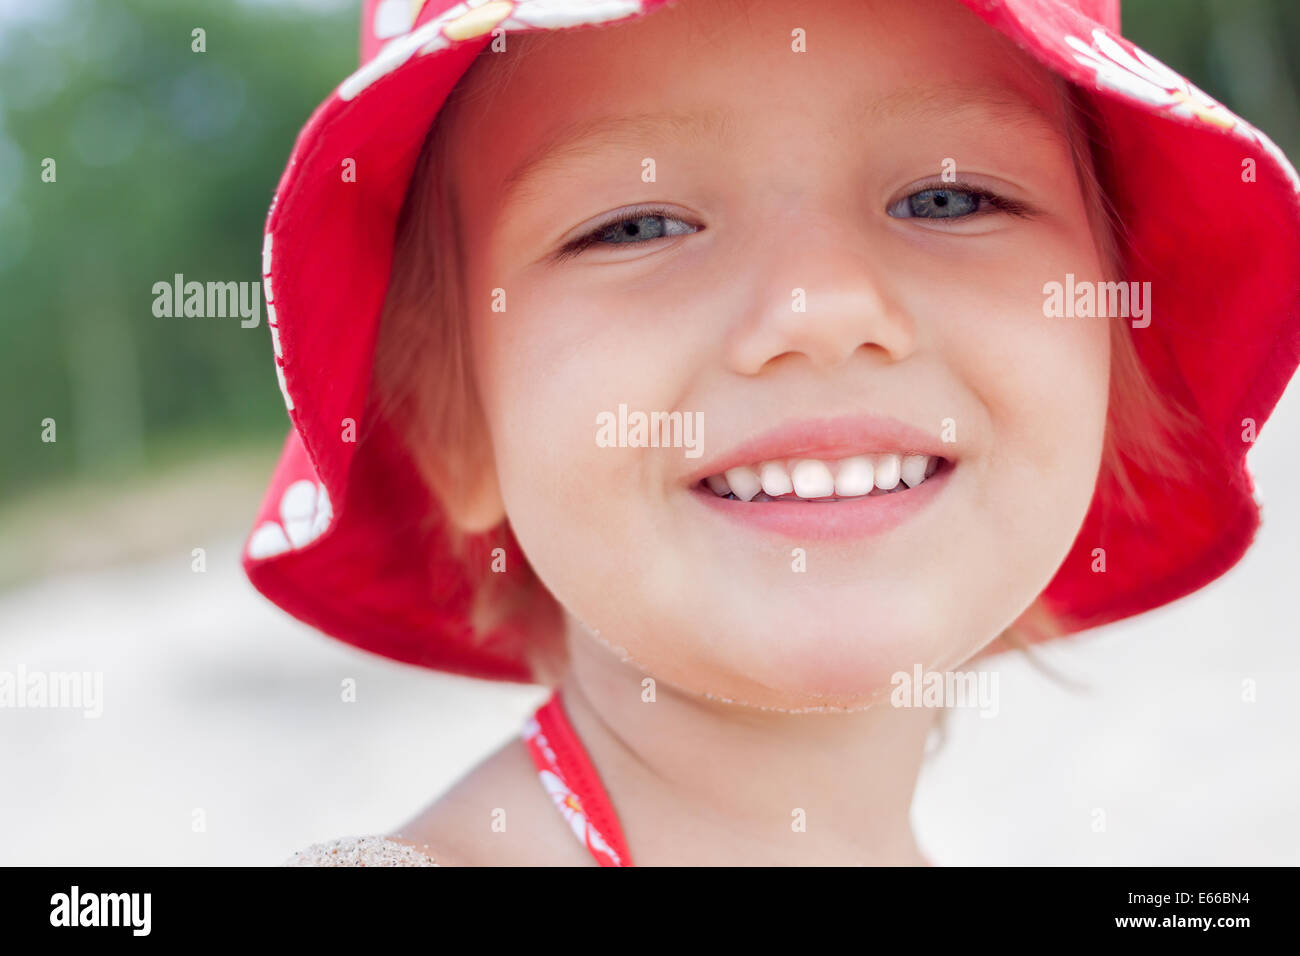 cheerful child girl smiling face close up outdoor Stock Photo